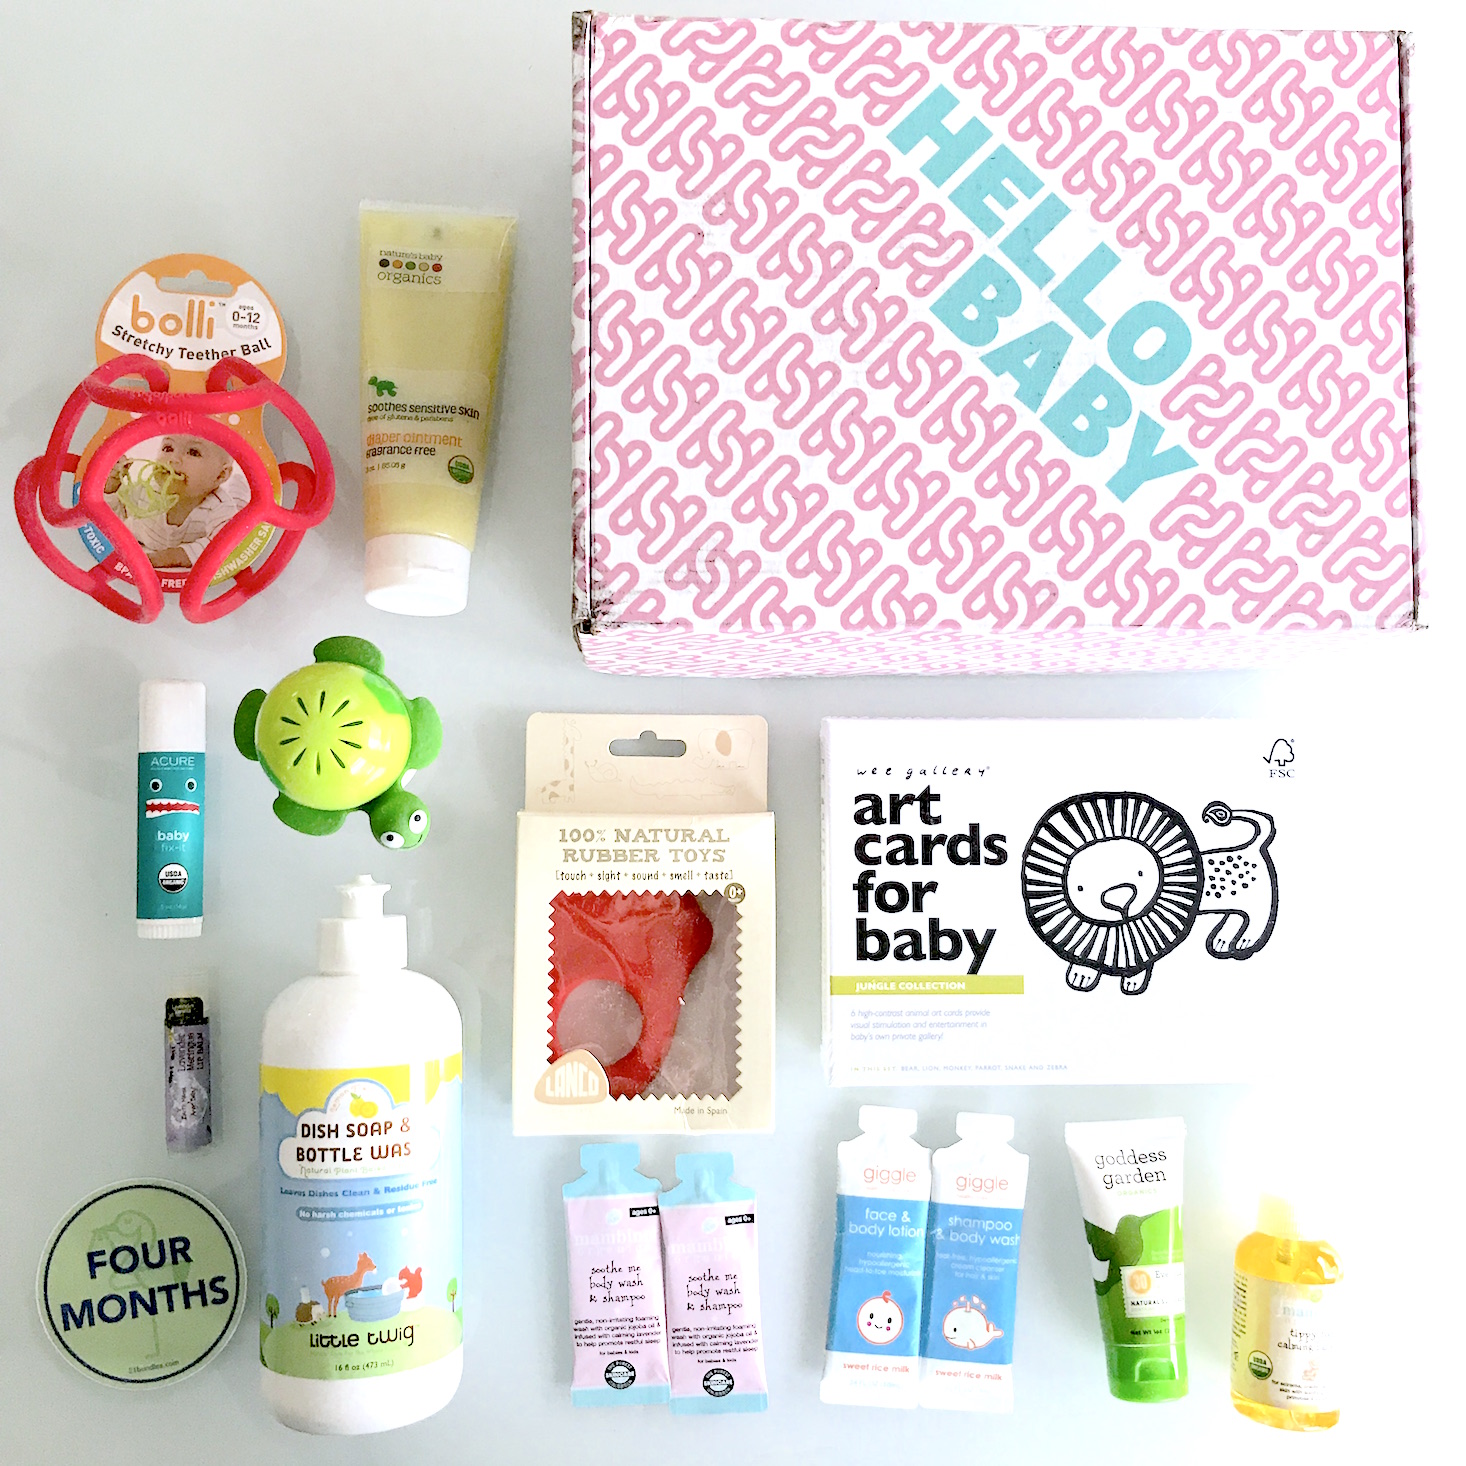 Healthiest Baby 21 Bundles Healthiest Baby January 2018 all items